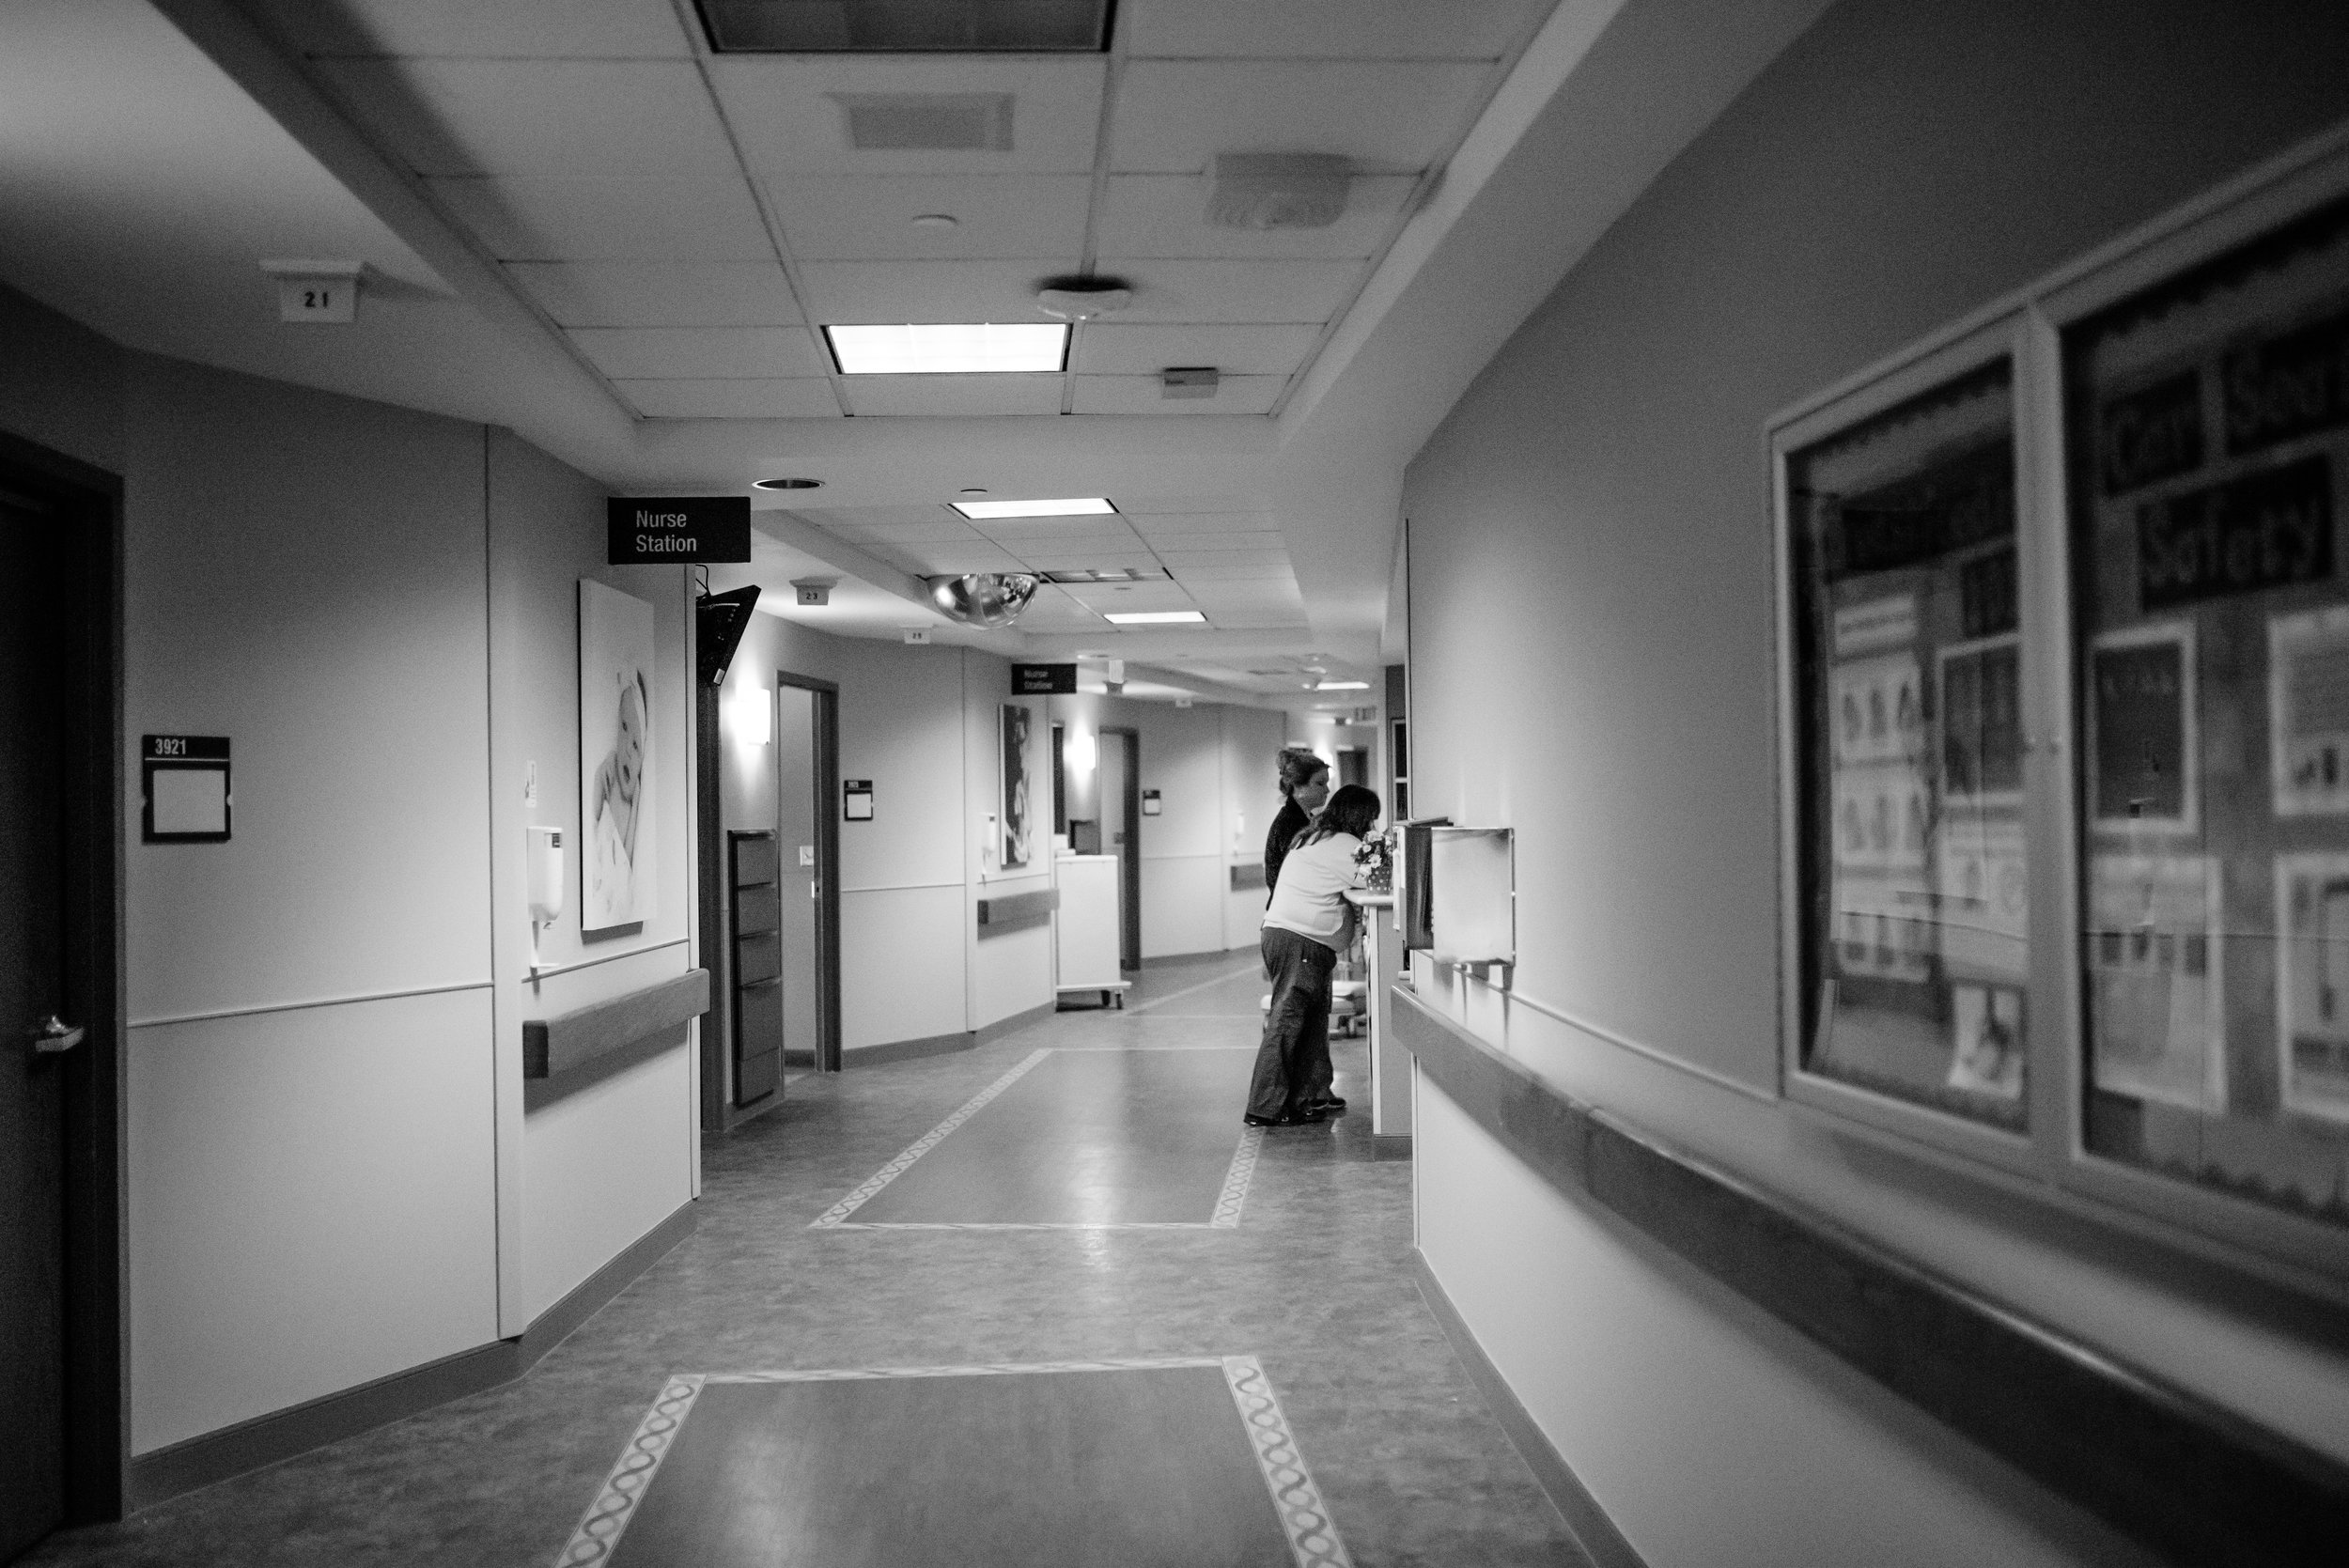 Hallway in labor and delivery ward